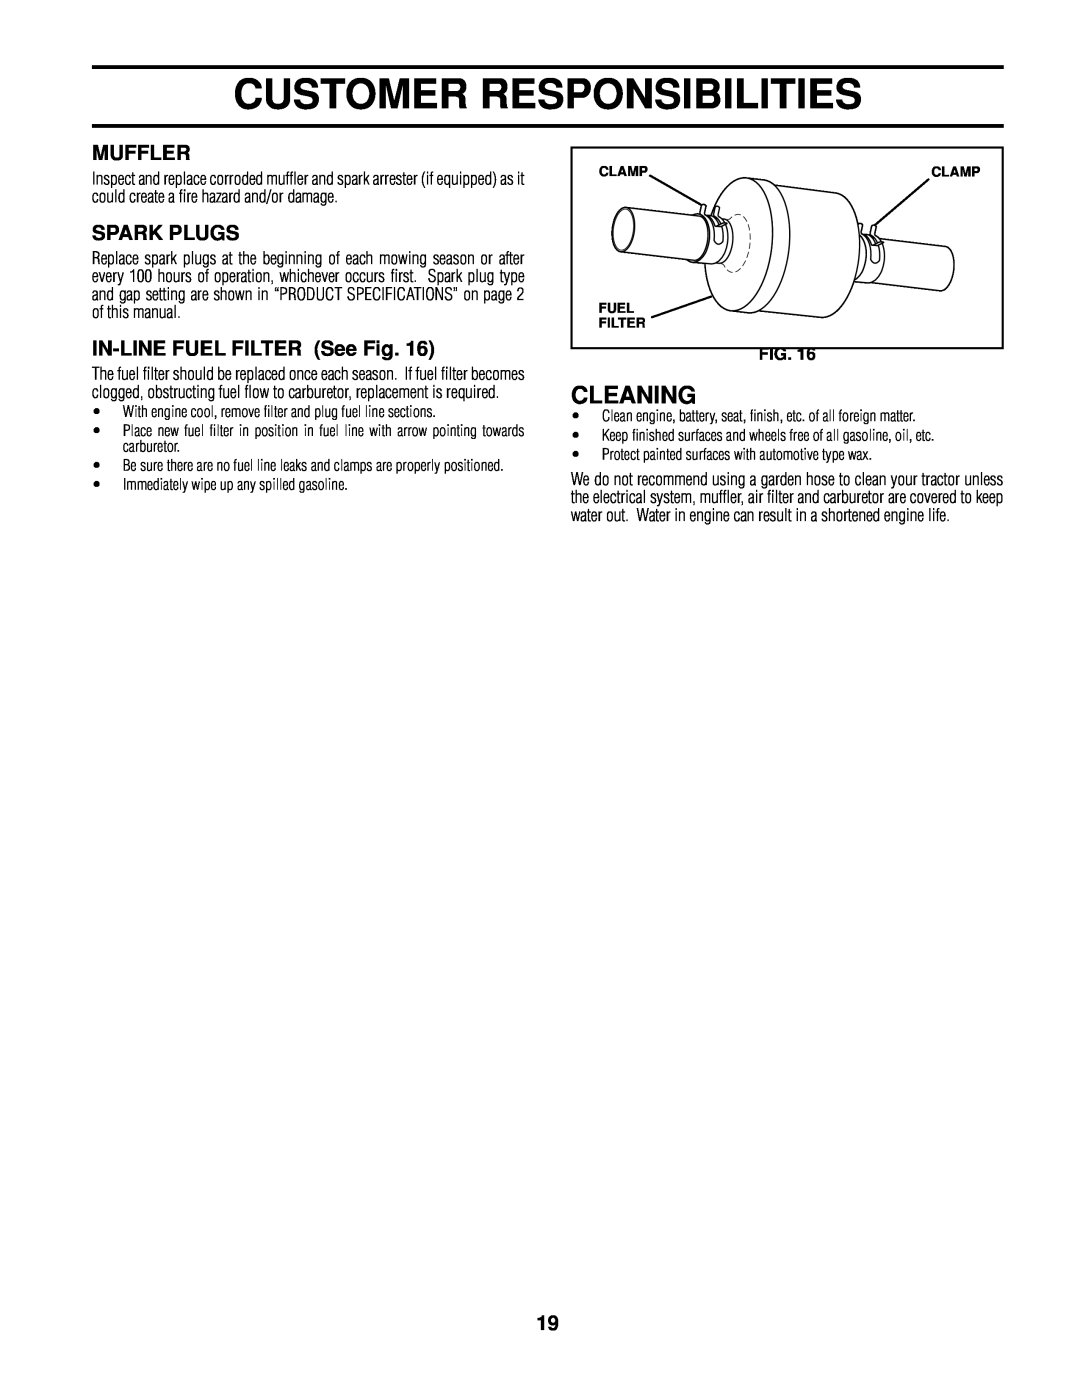 Poulan 161608 owner manual Cleaning, Customer Responsibilities, Muffler, Spark Plugs, IN-LINE FUEL FILTER See Fig 